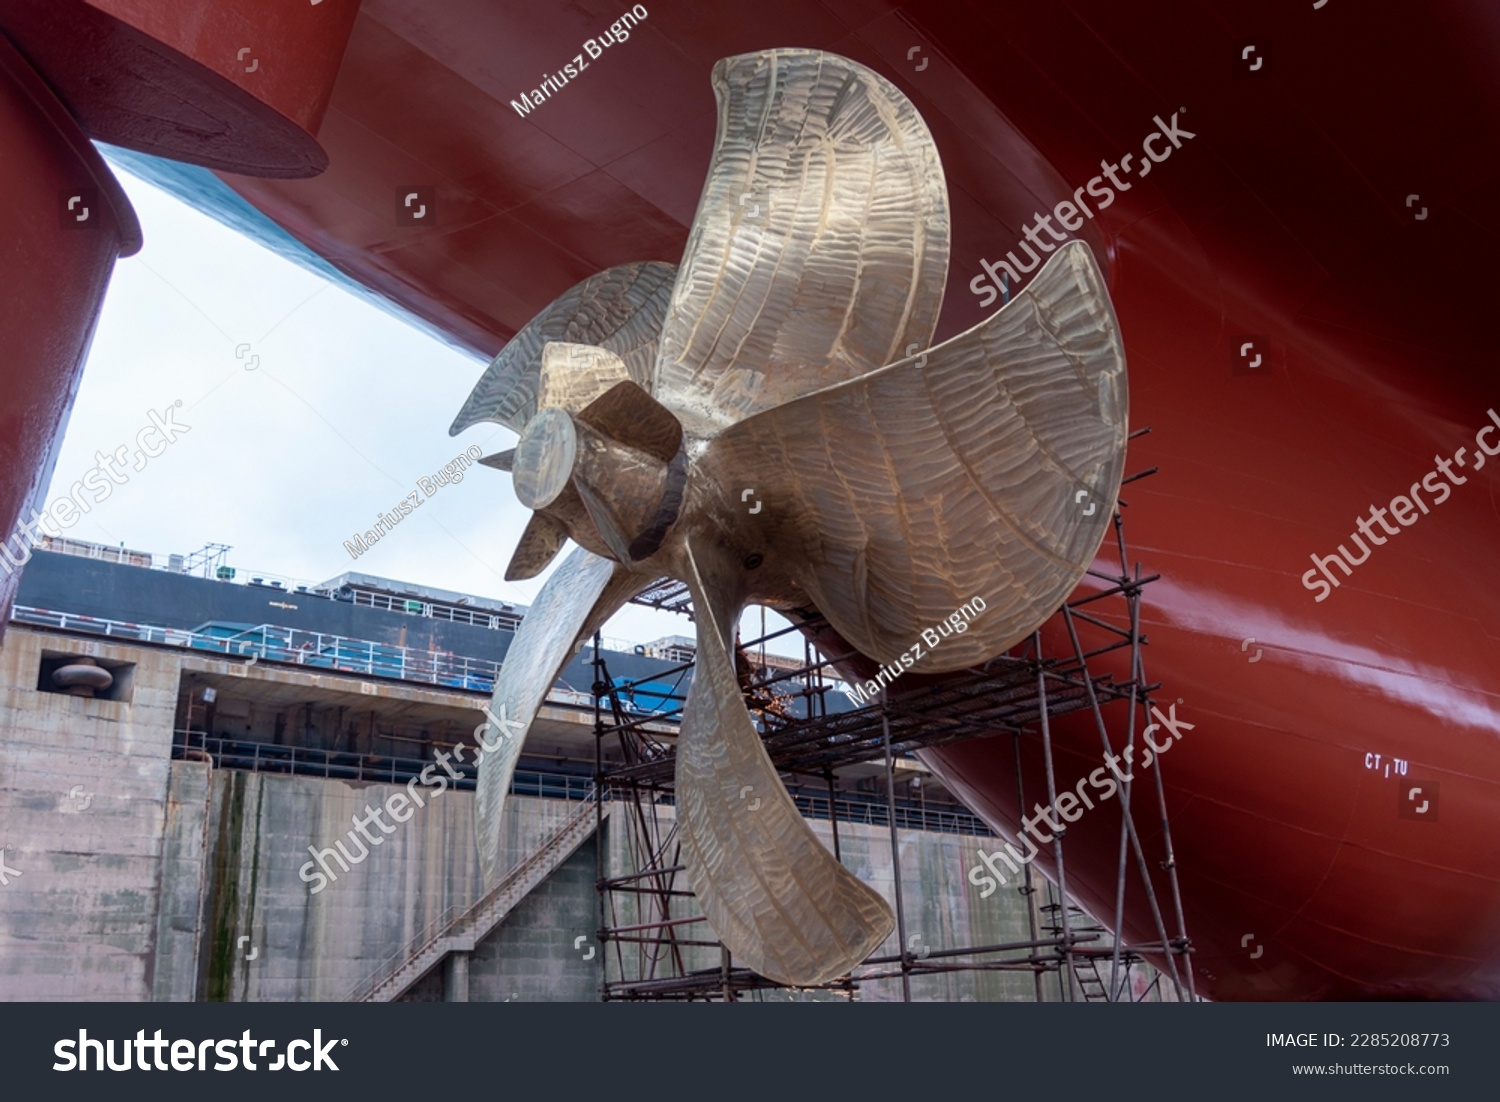 View on the container ship propeller. Ship is inside a dry dock for routine maintenance and painting. #2285208773